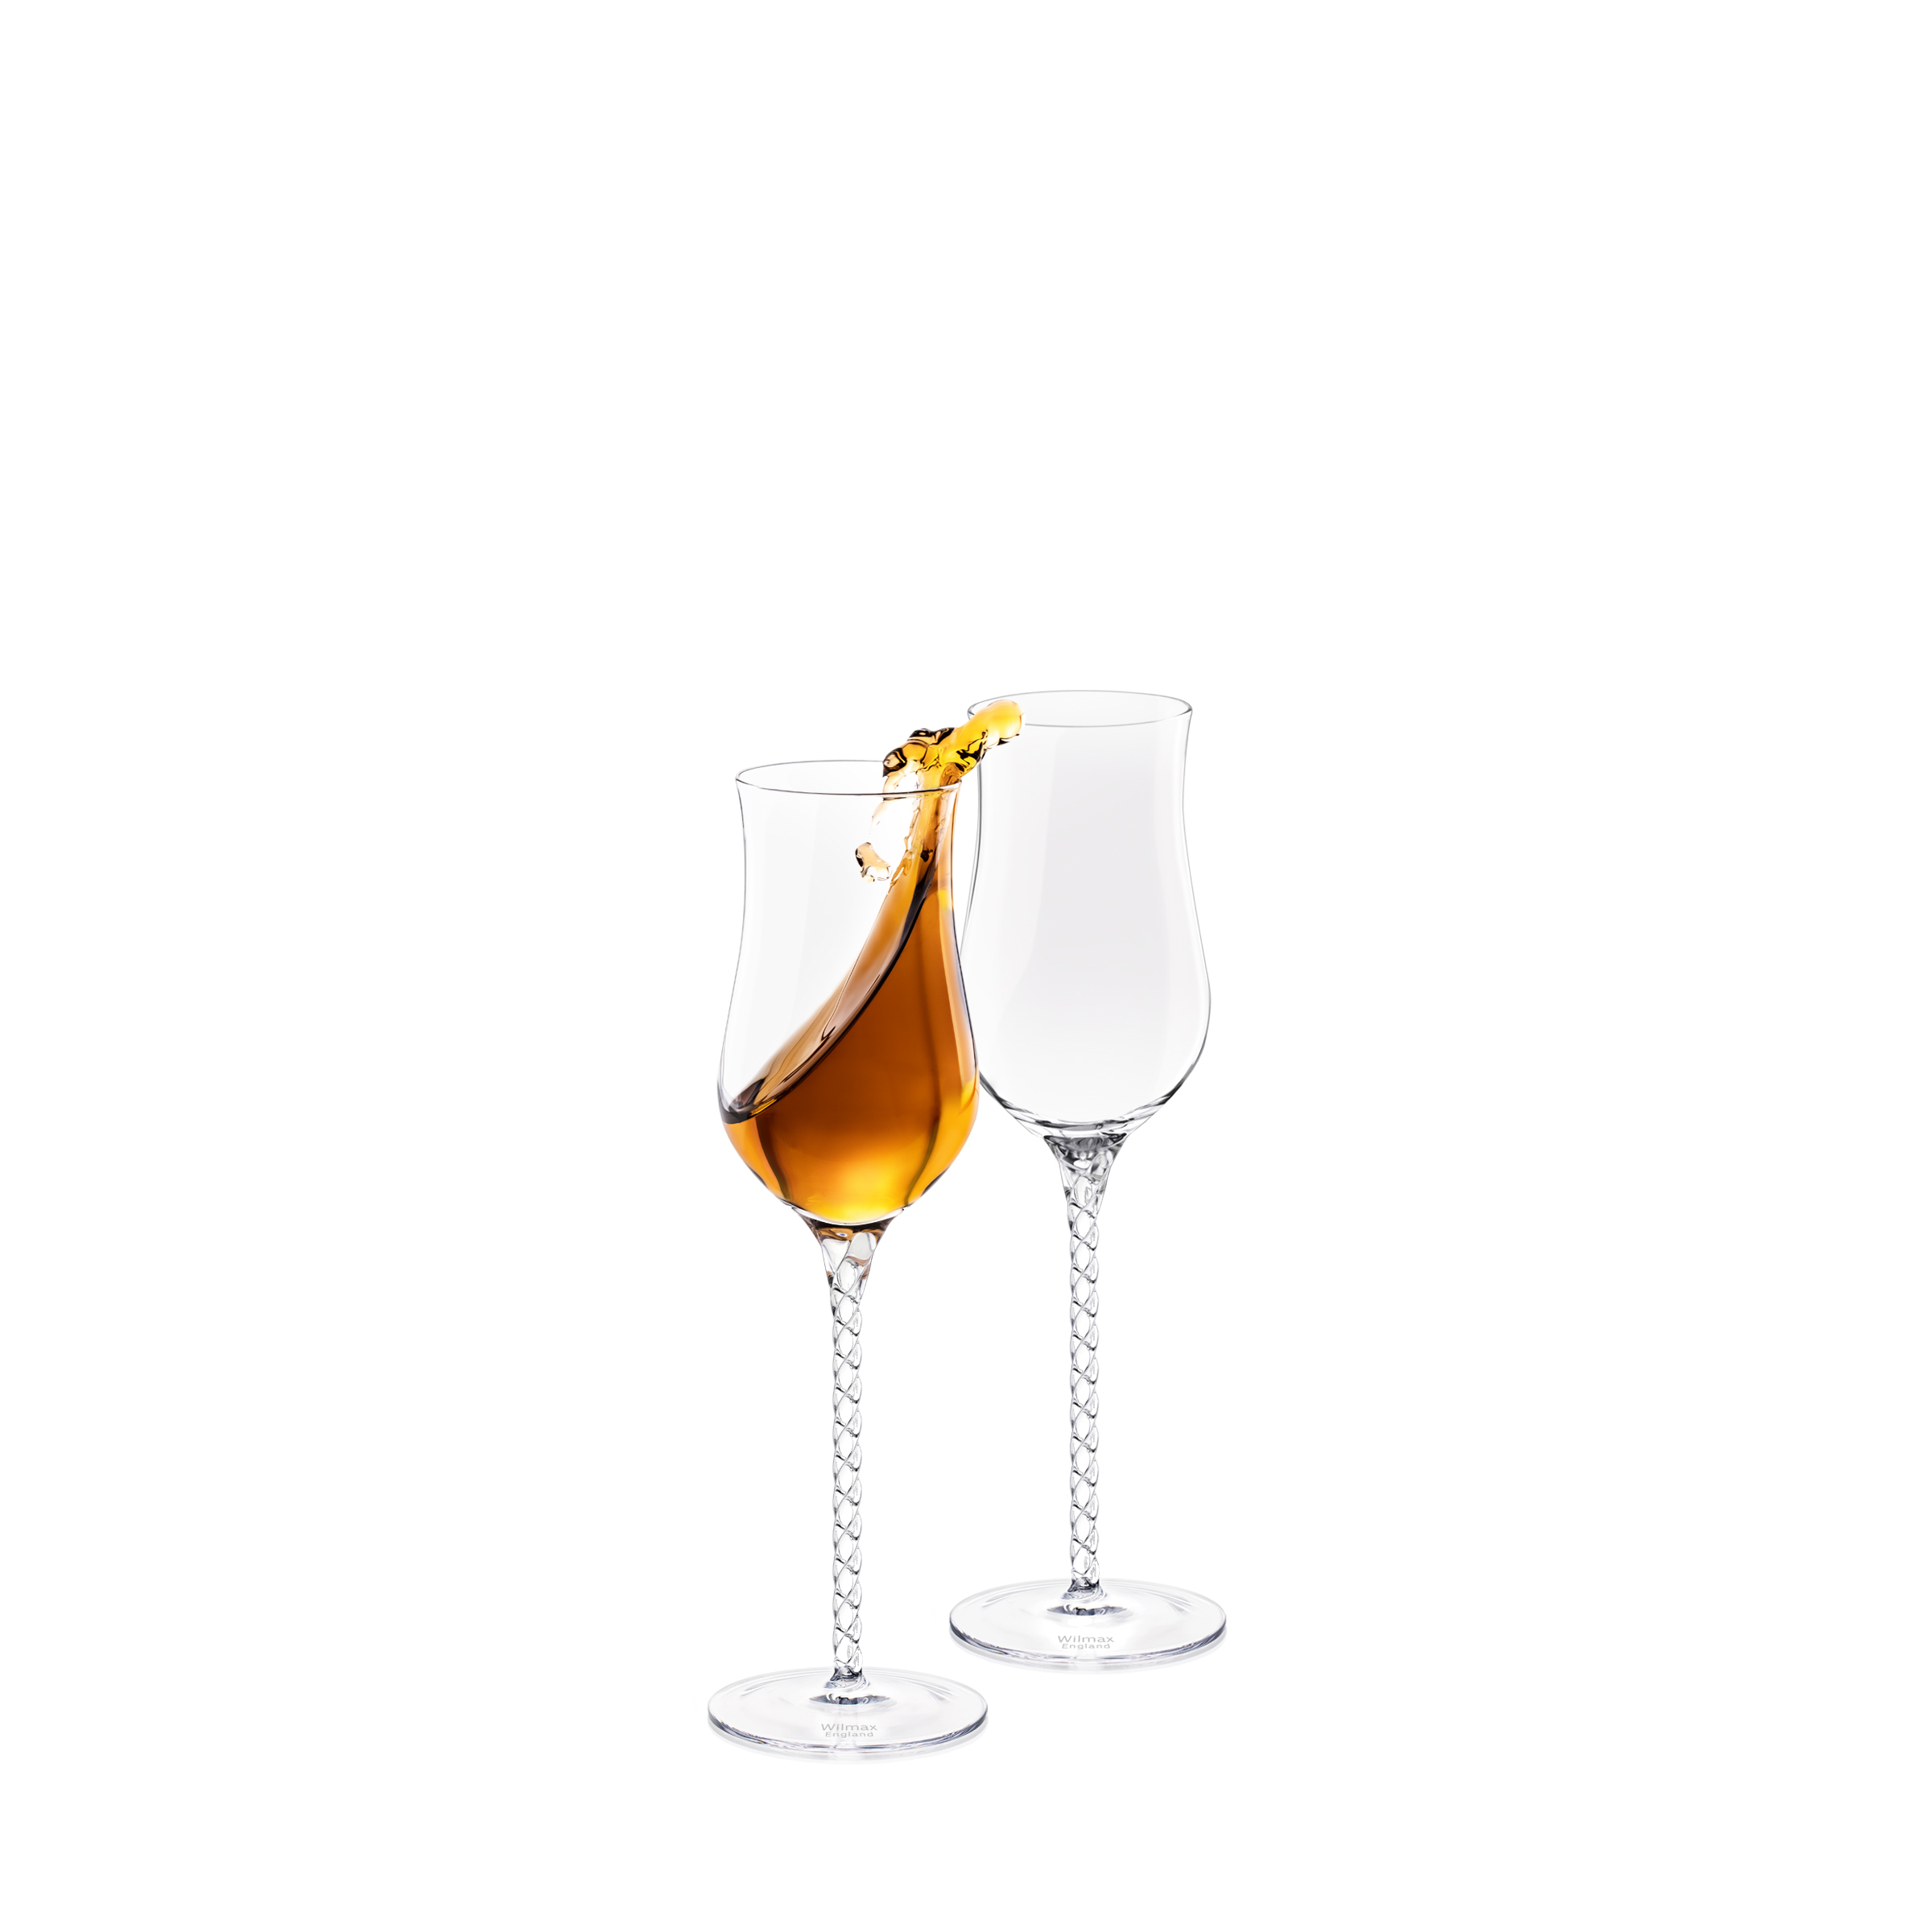 6433-thelma-louise-wine-glass-set-of-2